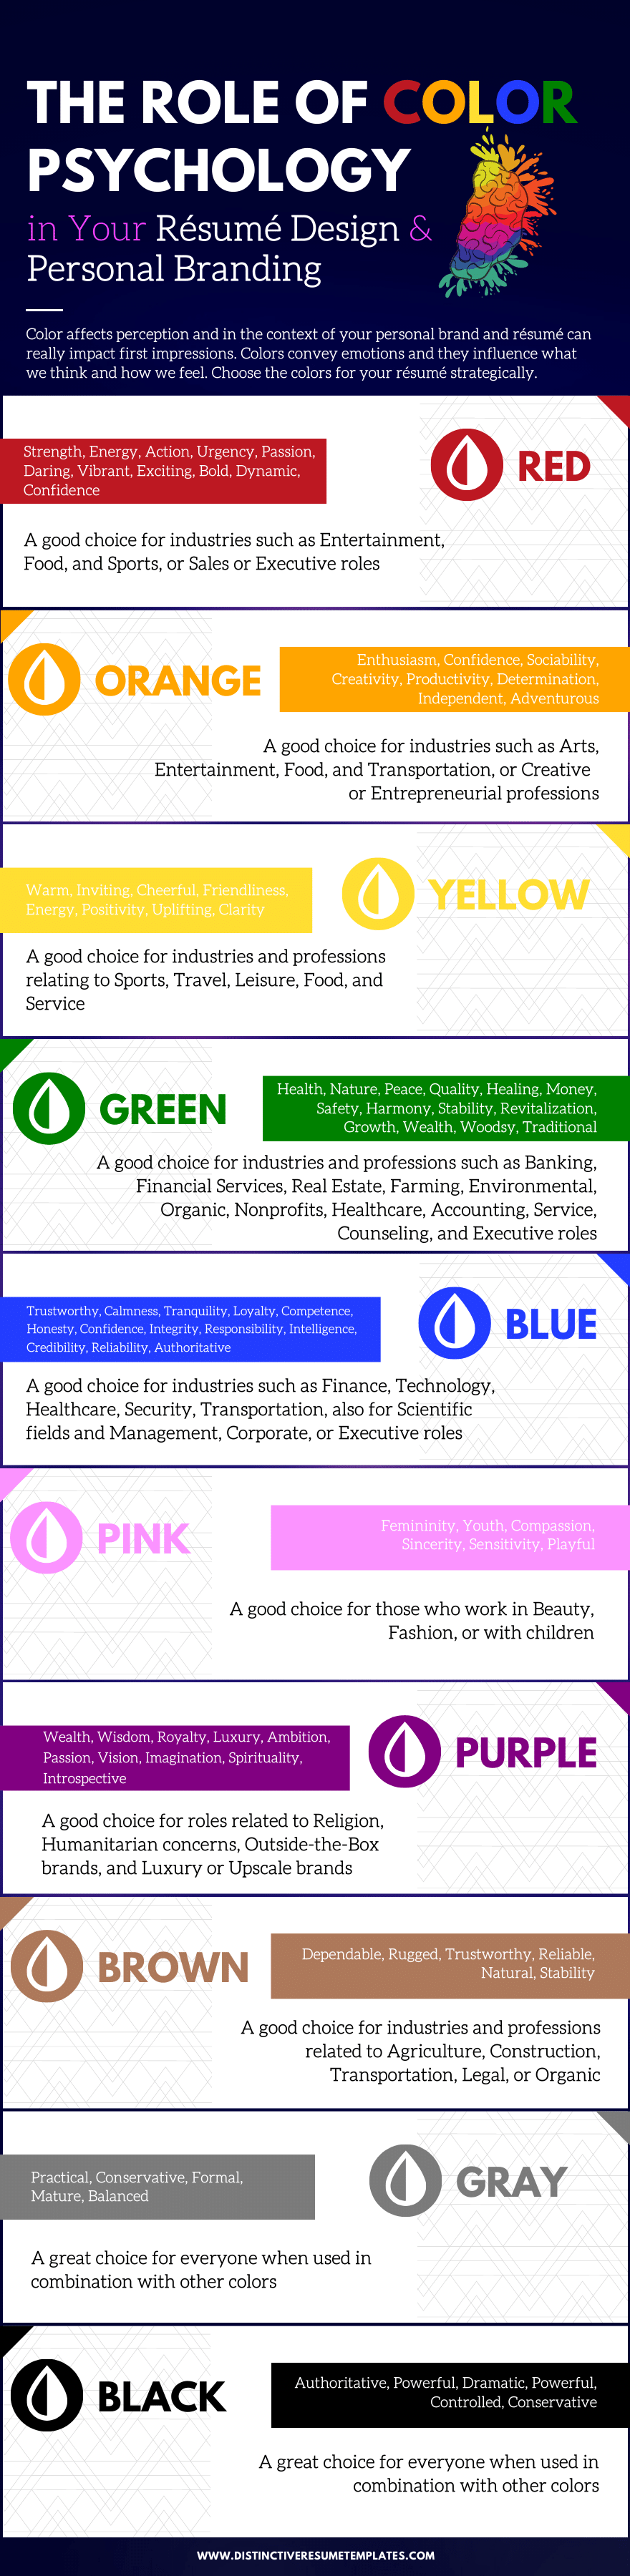 Using color on your resume